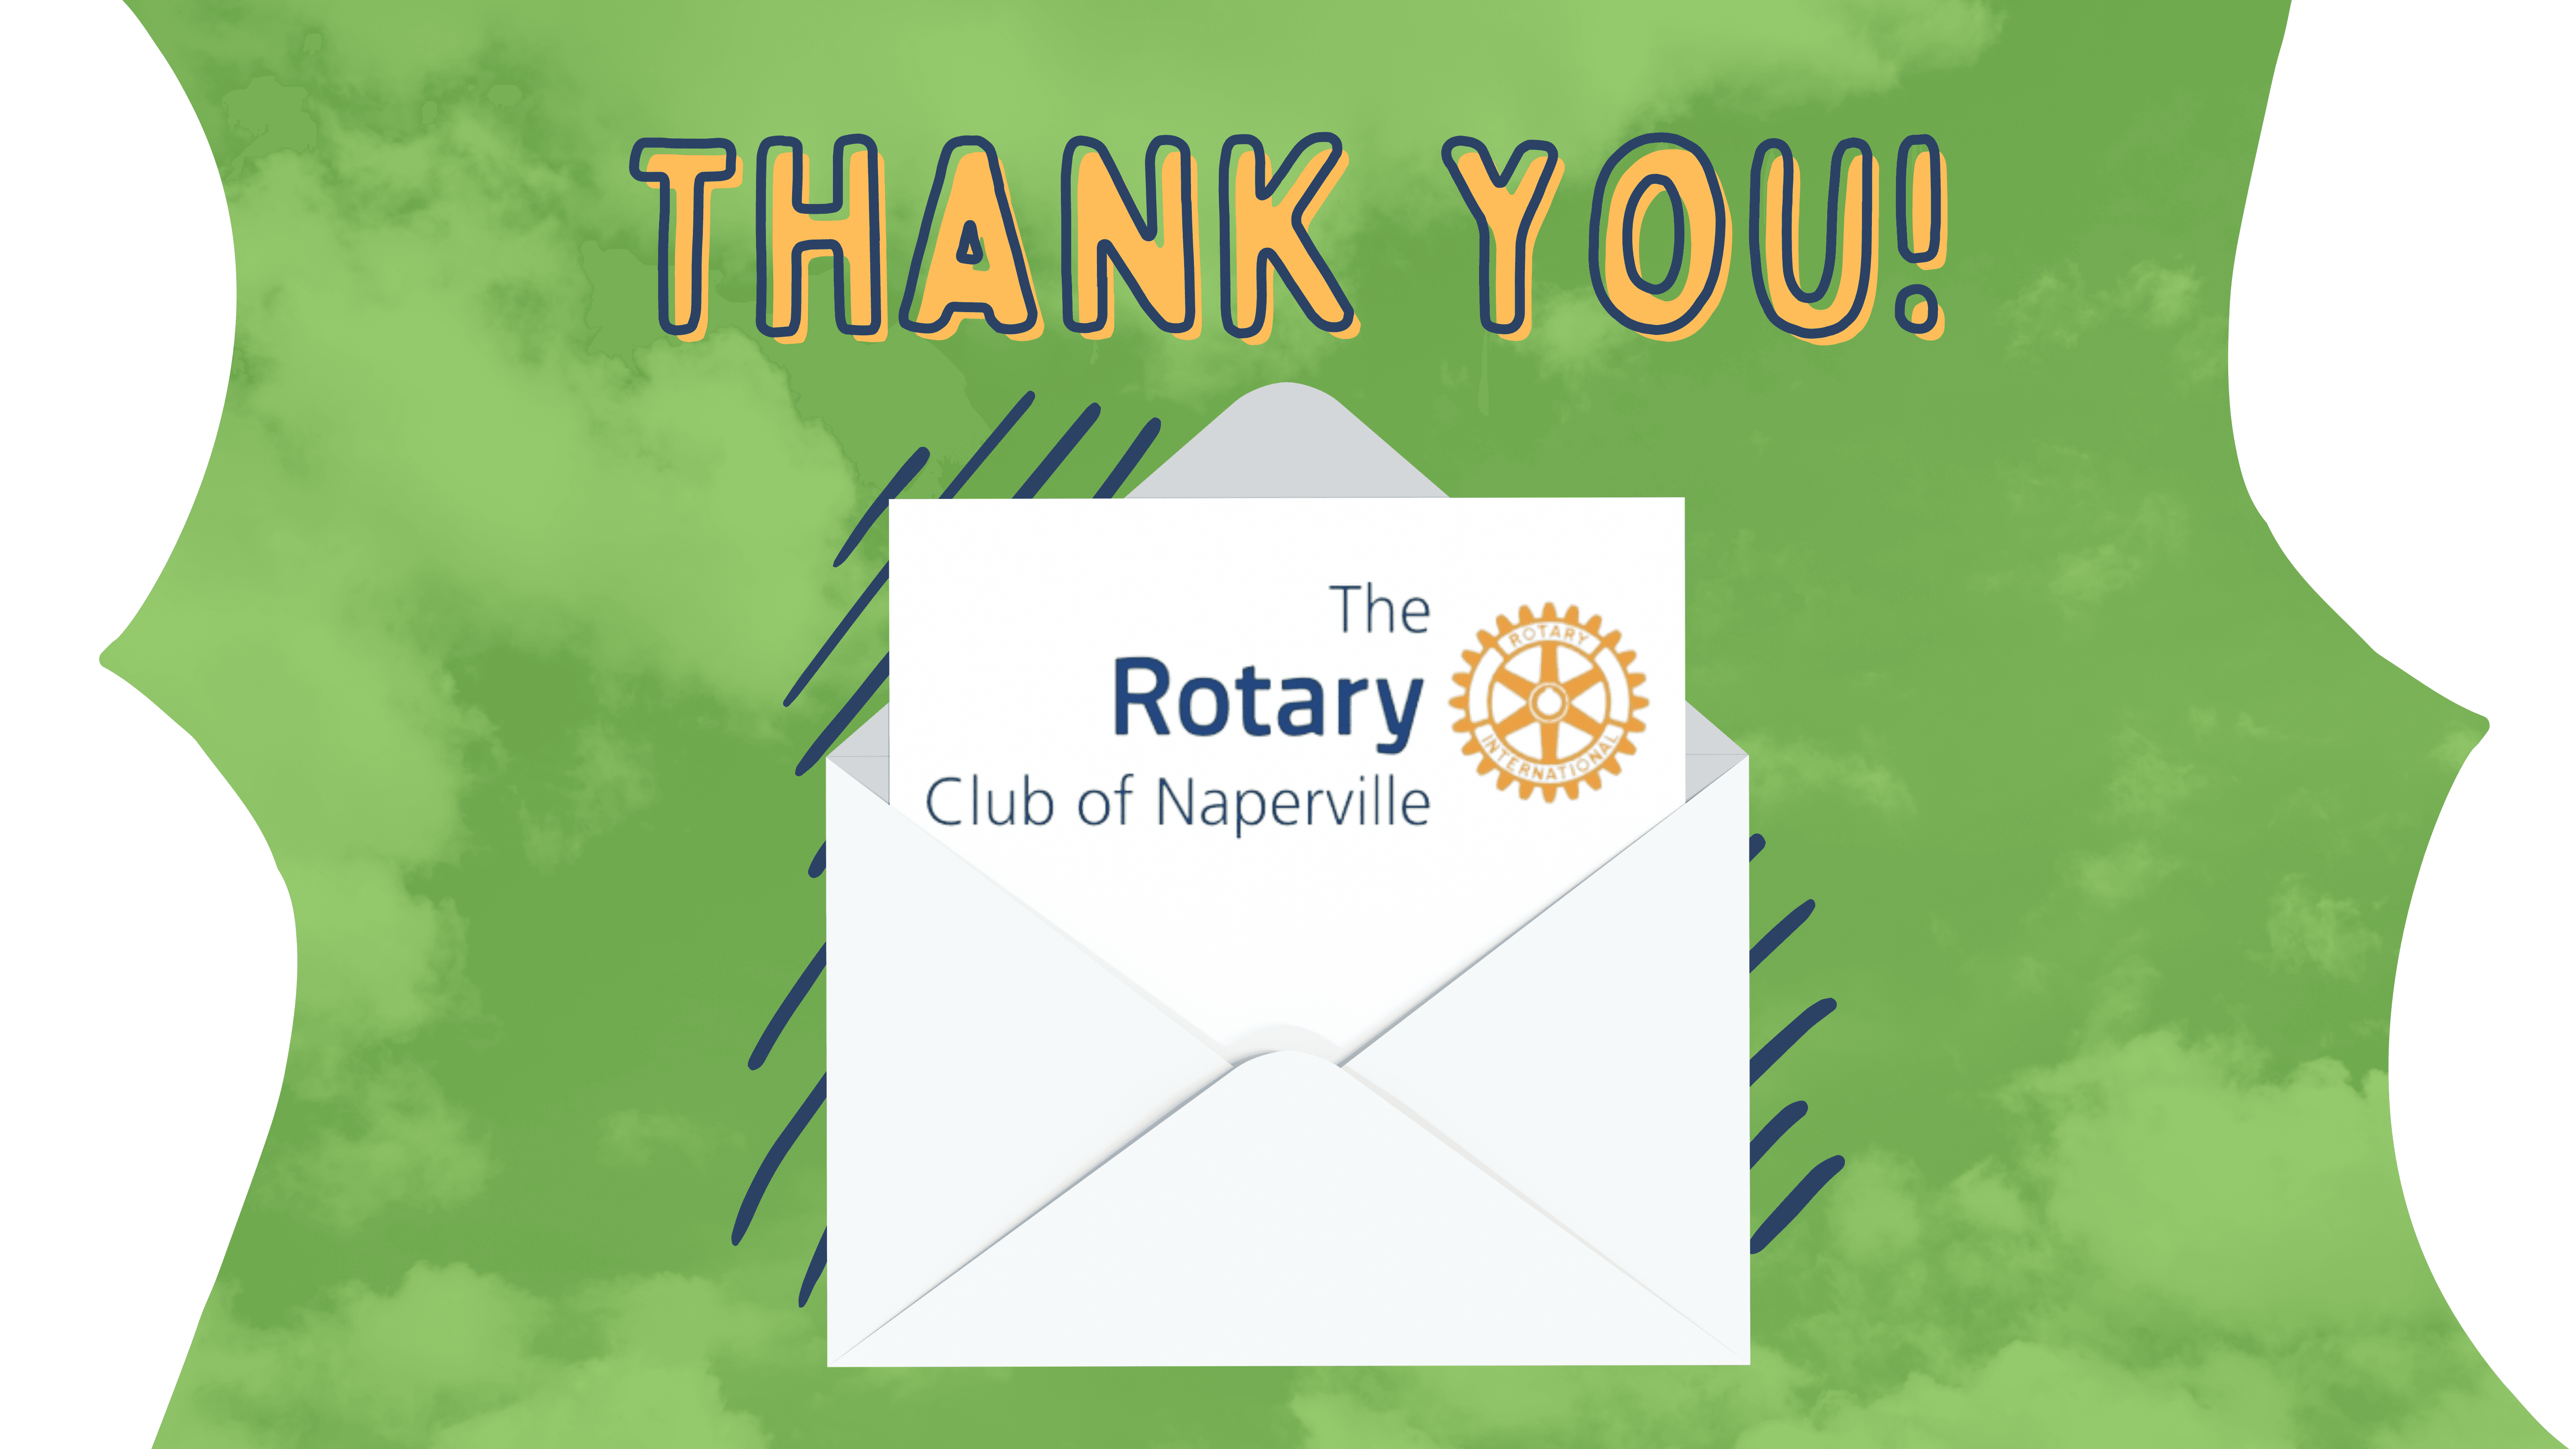 Thank you to the The Rotary Club of Naperville!